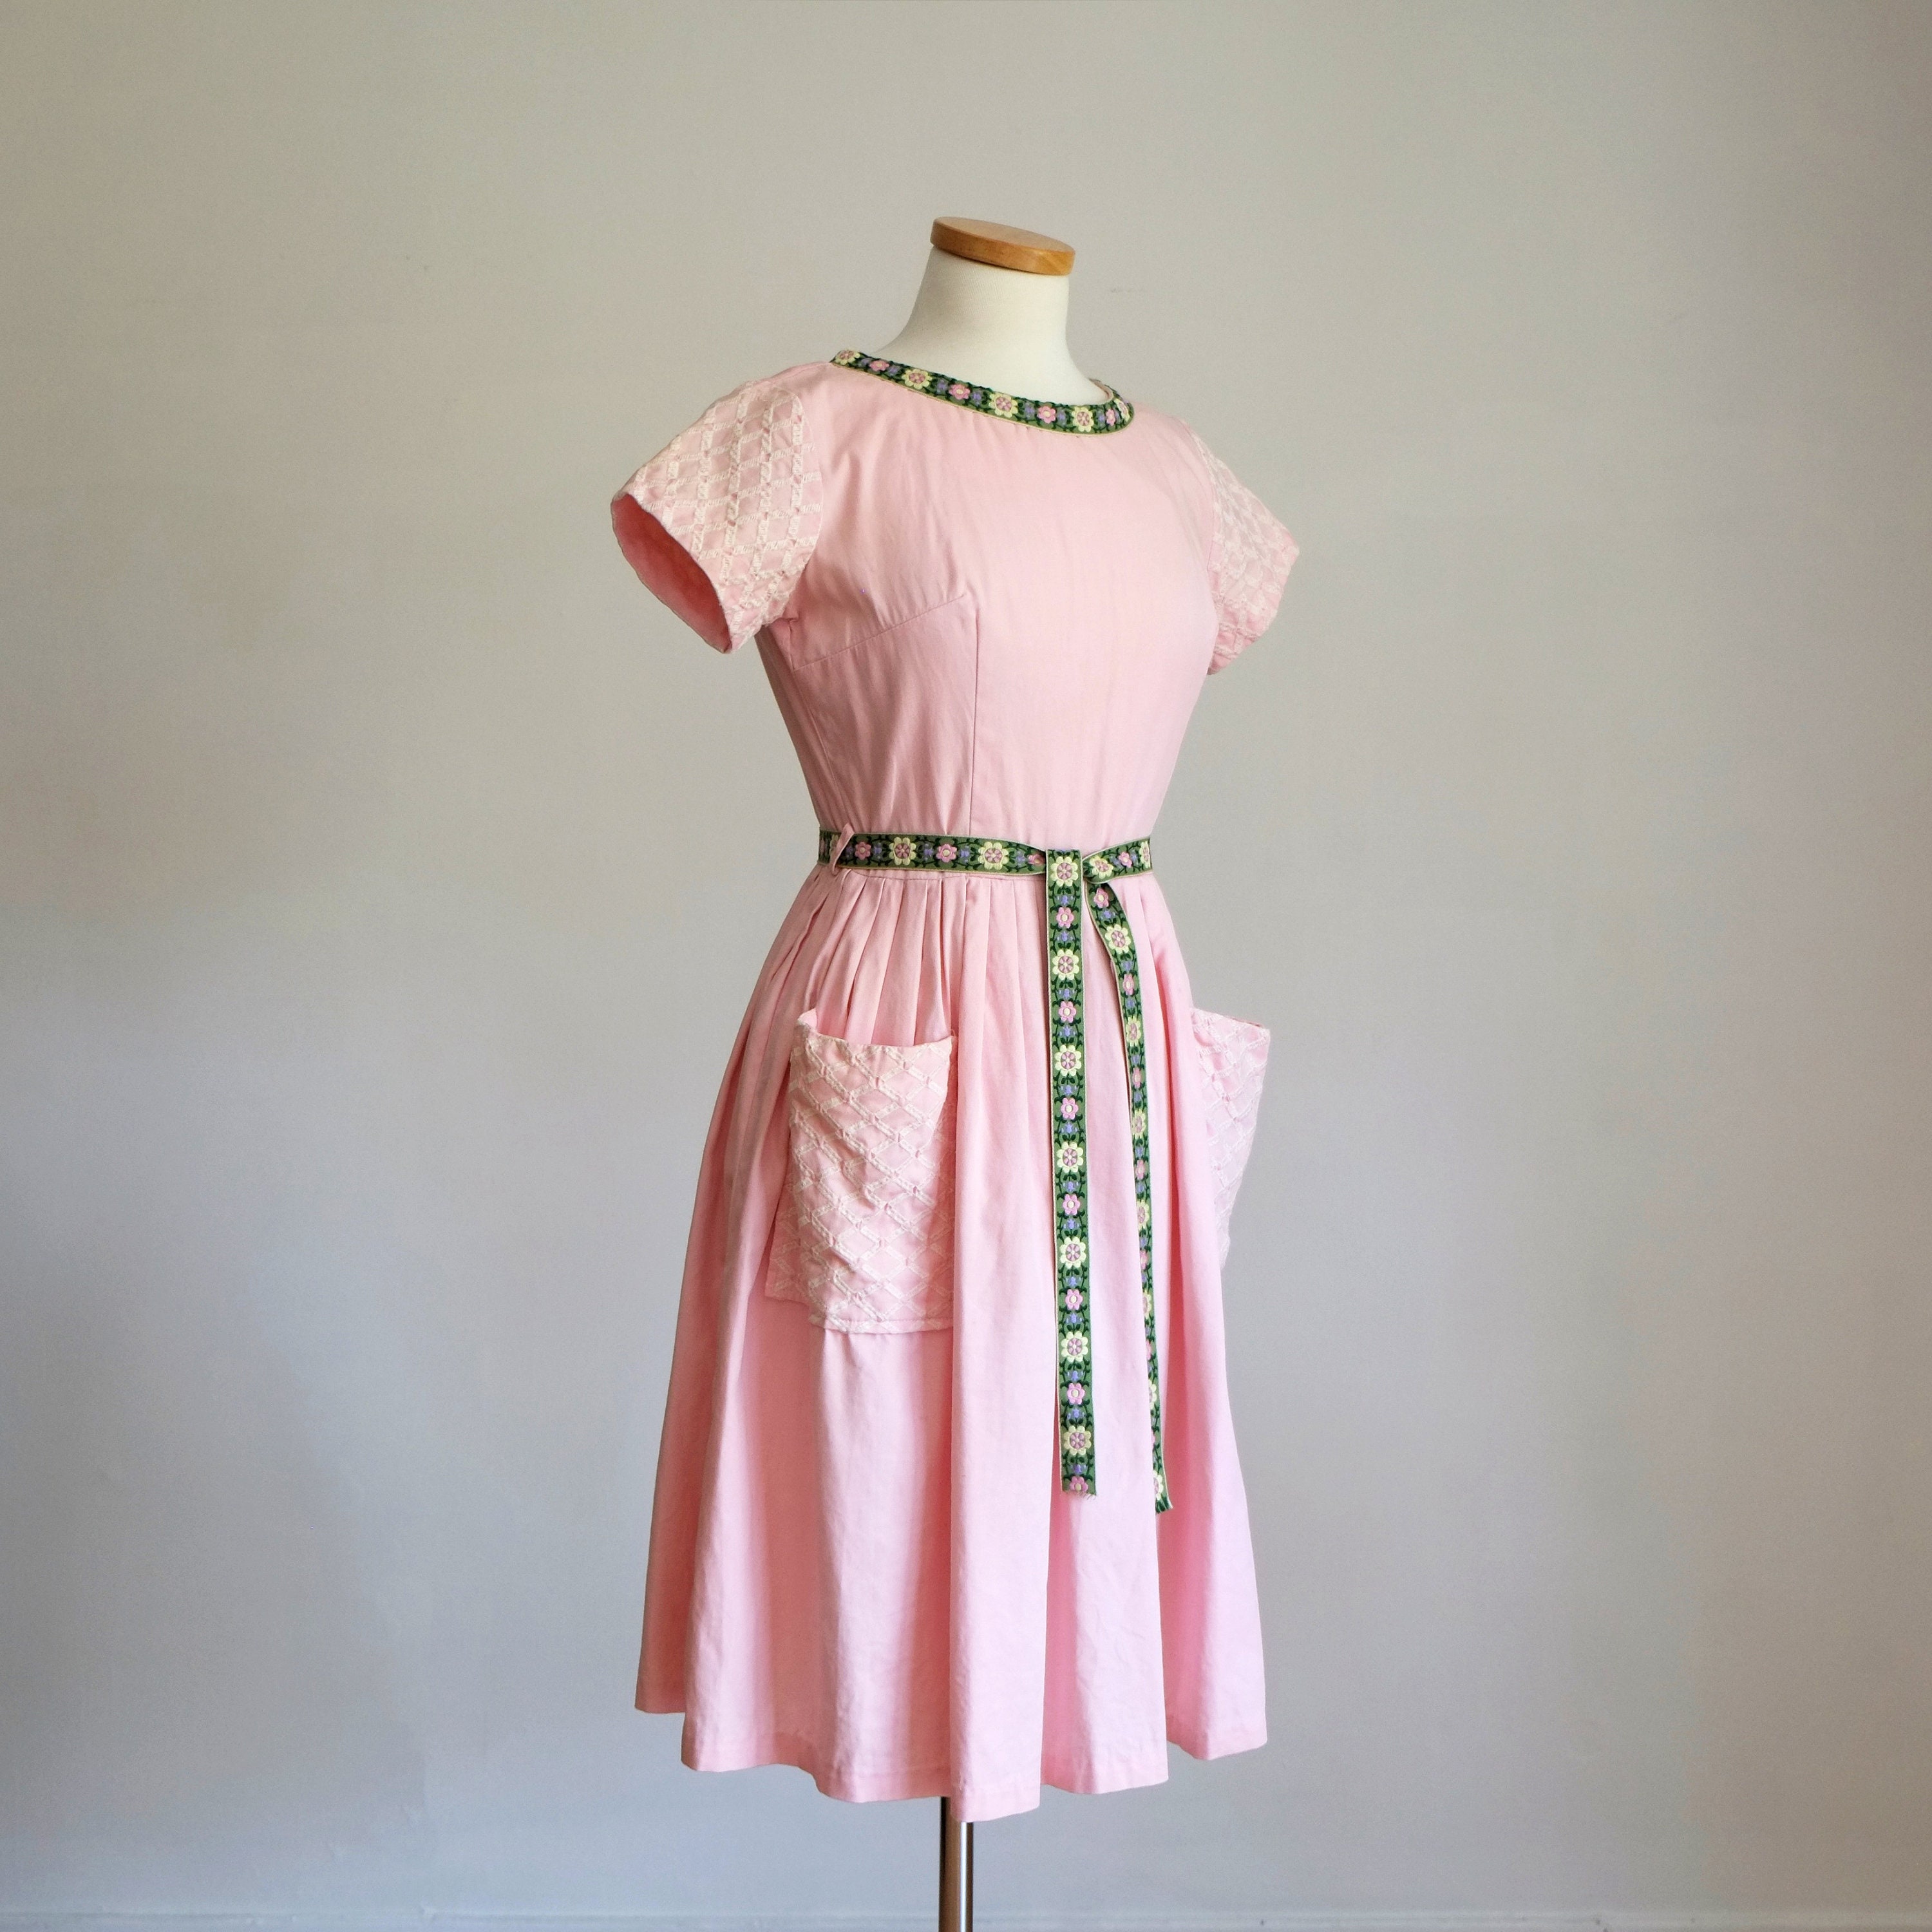 Vintage 1950s Pink Embroidered Cotton Fit & Flare Summer Dress - Etsy